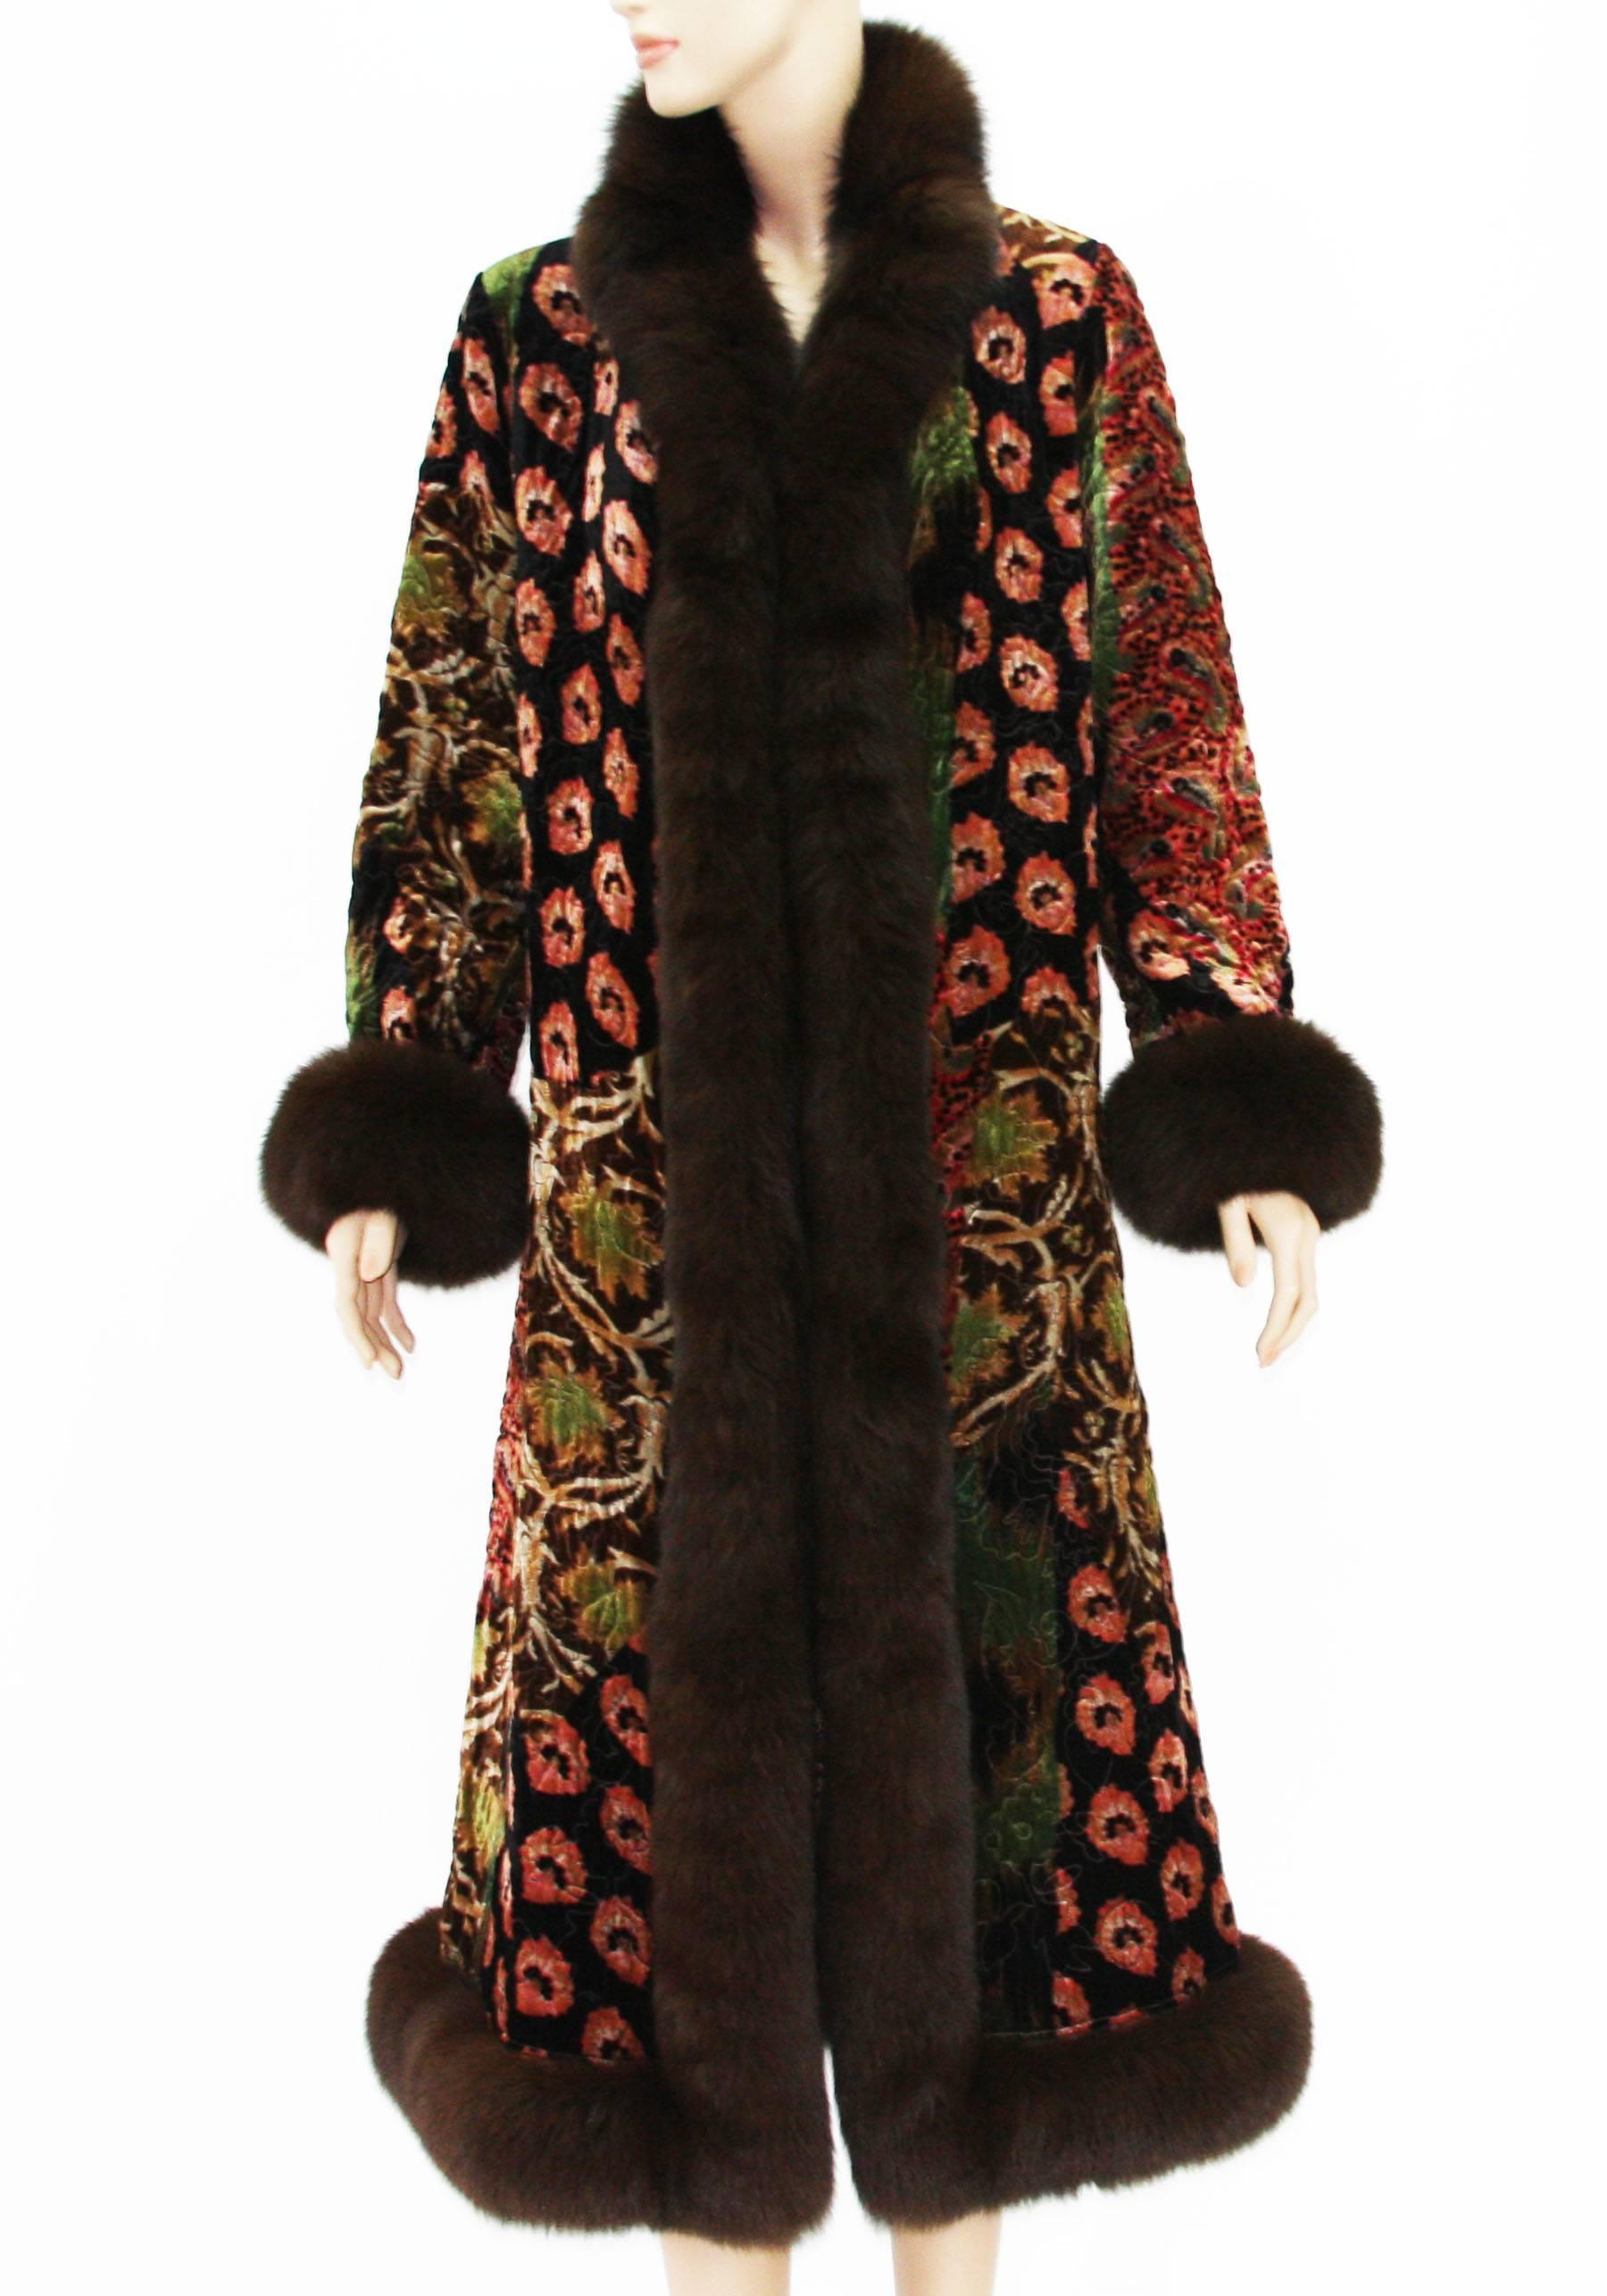 Oscar de la Renta Velvet Sable Trimmed Quilted Coat + Matching Halter Velvet Dress
F/W 2002 Runway Collection
US size - 6
Absolutely fabulous embroidered velvet coat in shades of tan, green, gold, pinks and peaches , black and brown.
Open front with